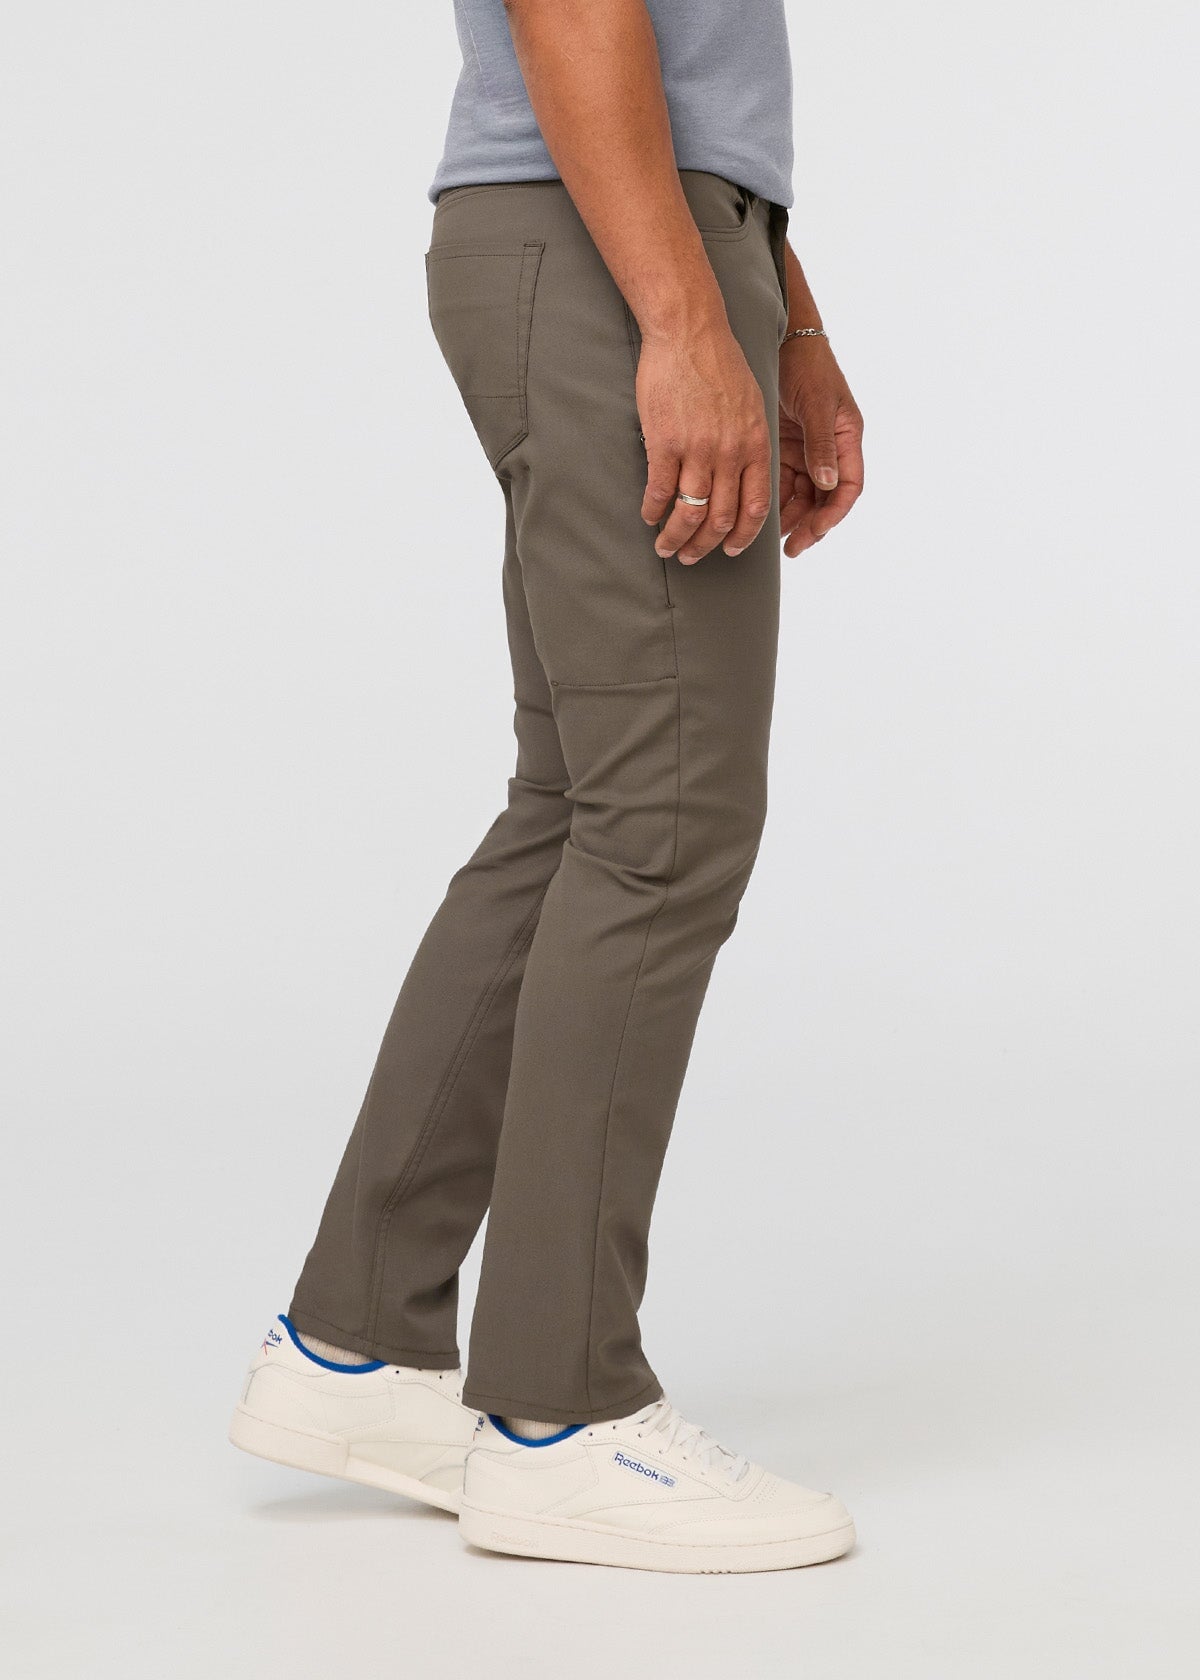 Stretch Terry 5-Pocket Pant (32 Inseam) - Faded Olive